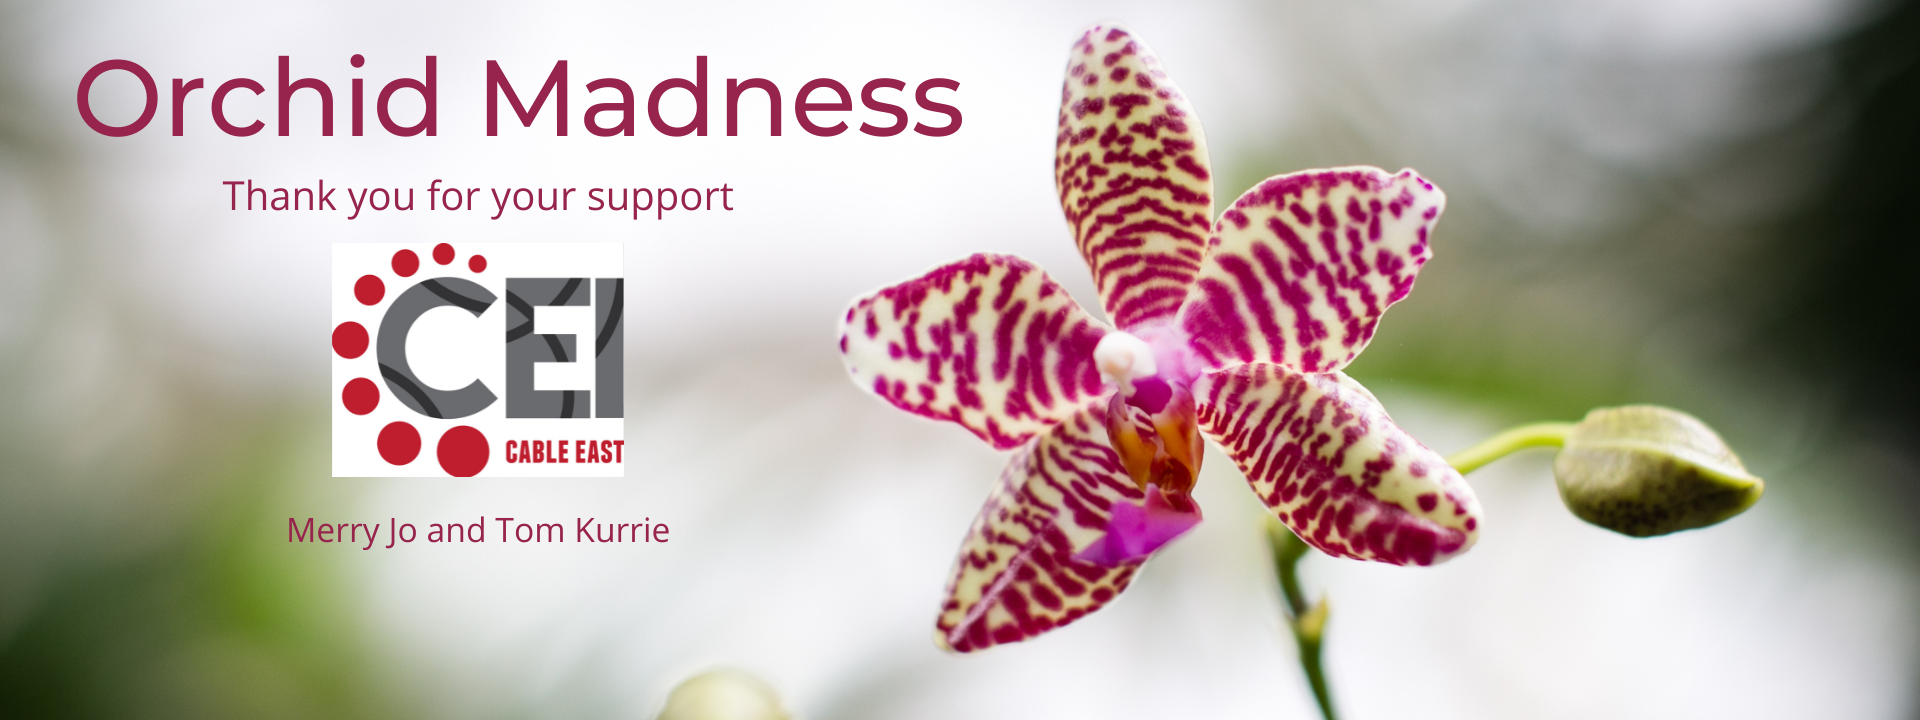 Orchid Madness web banner 2